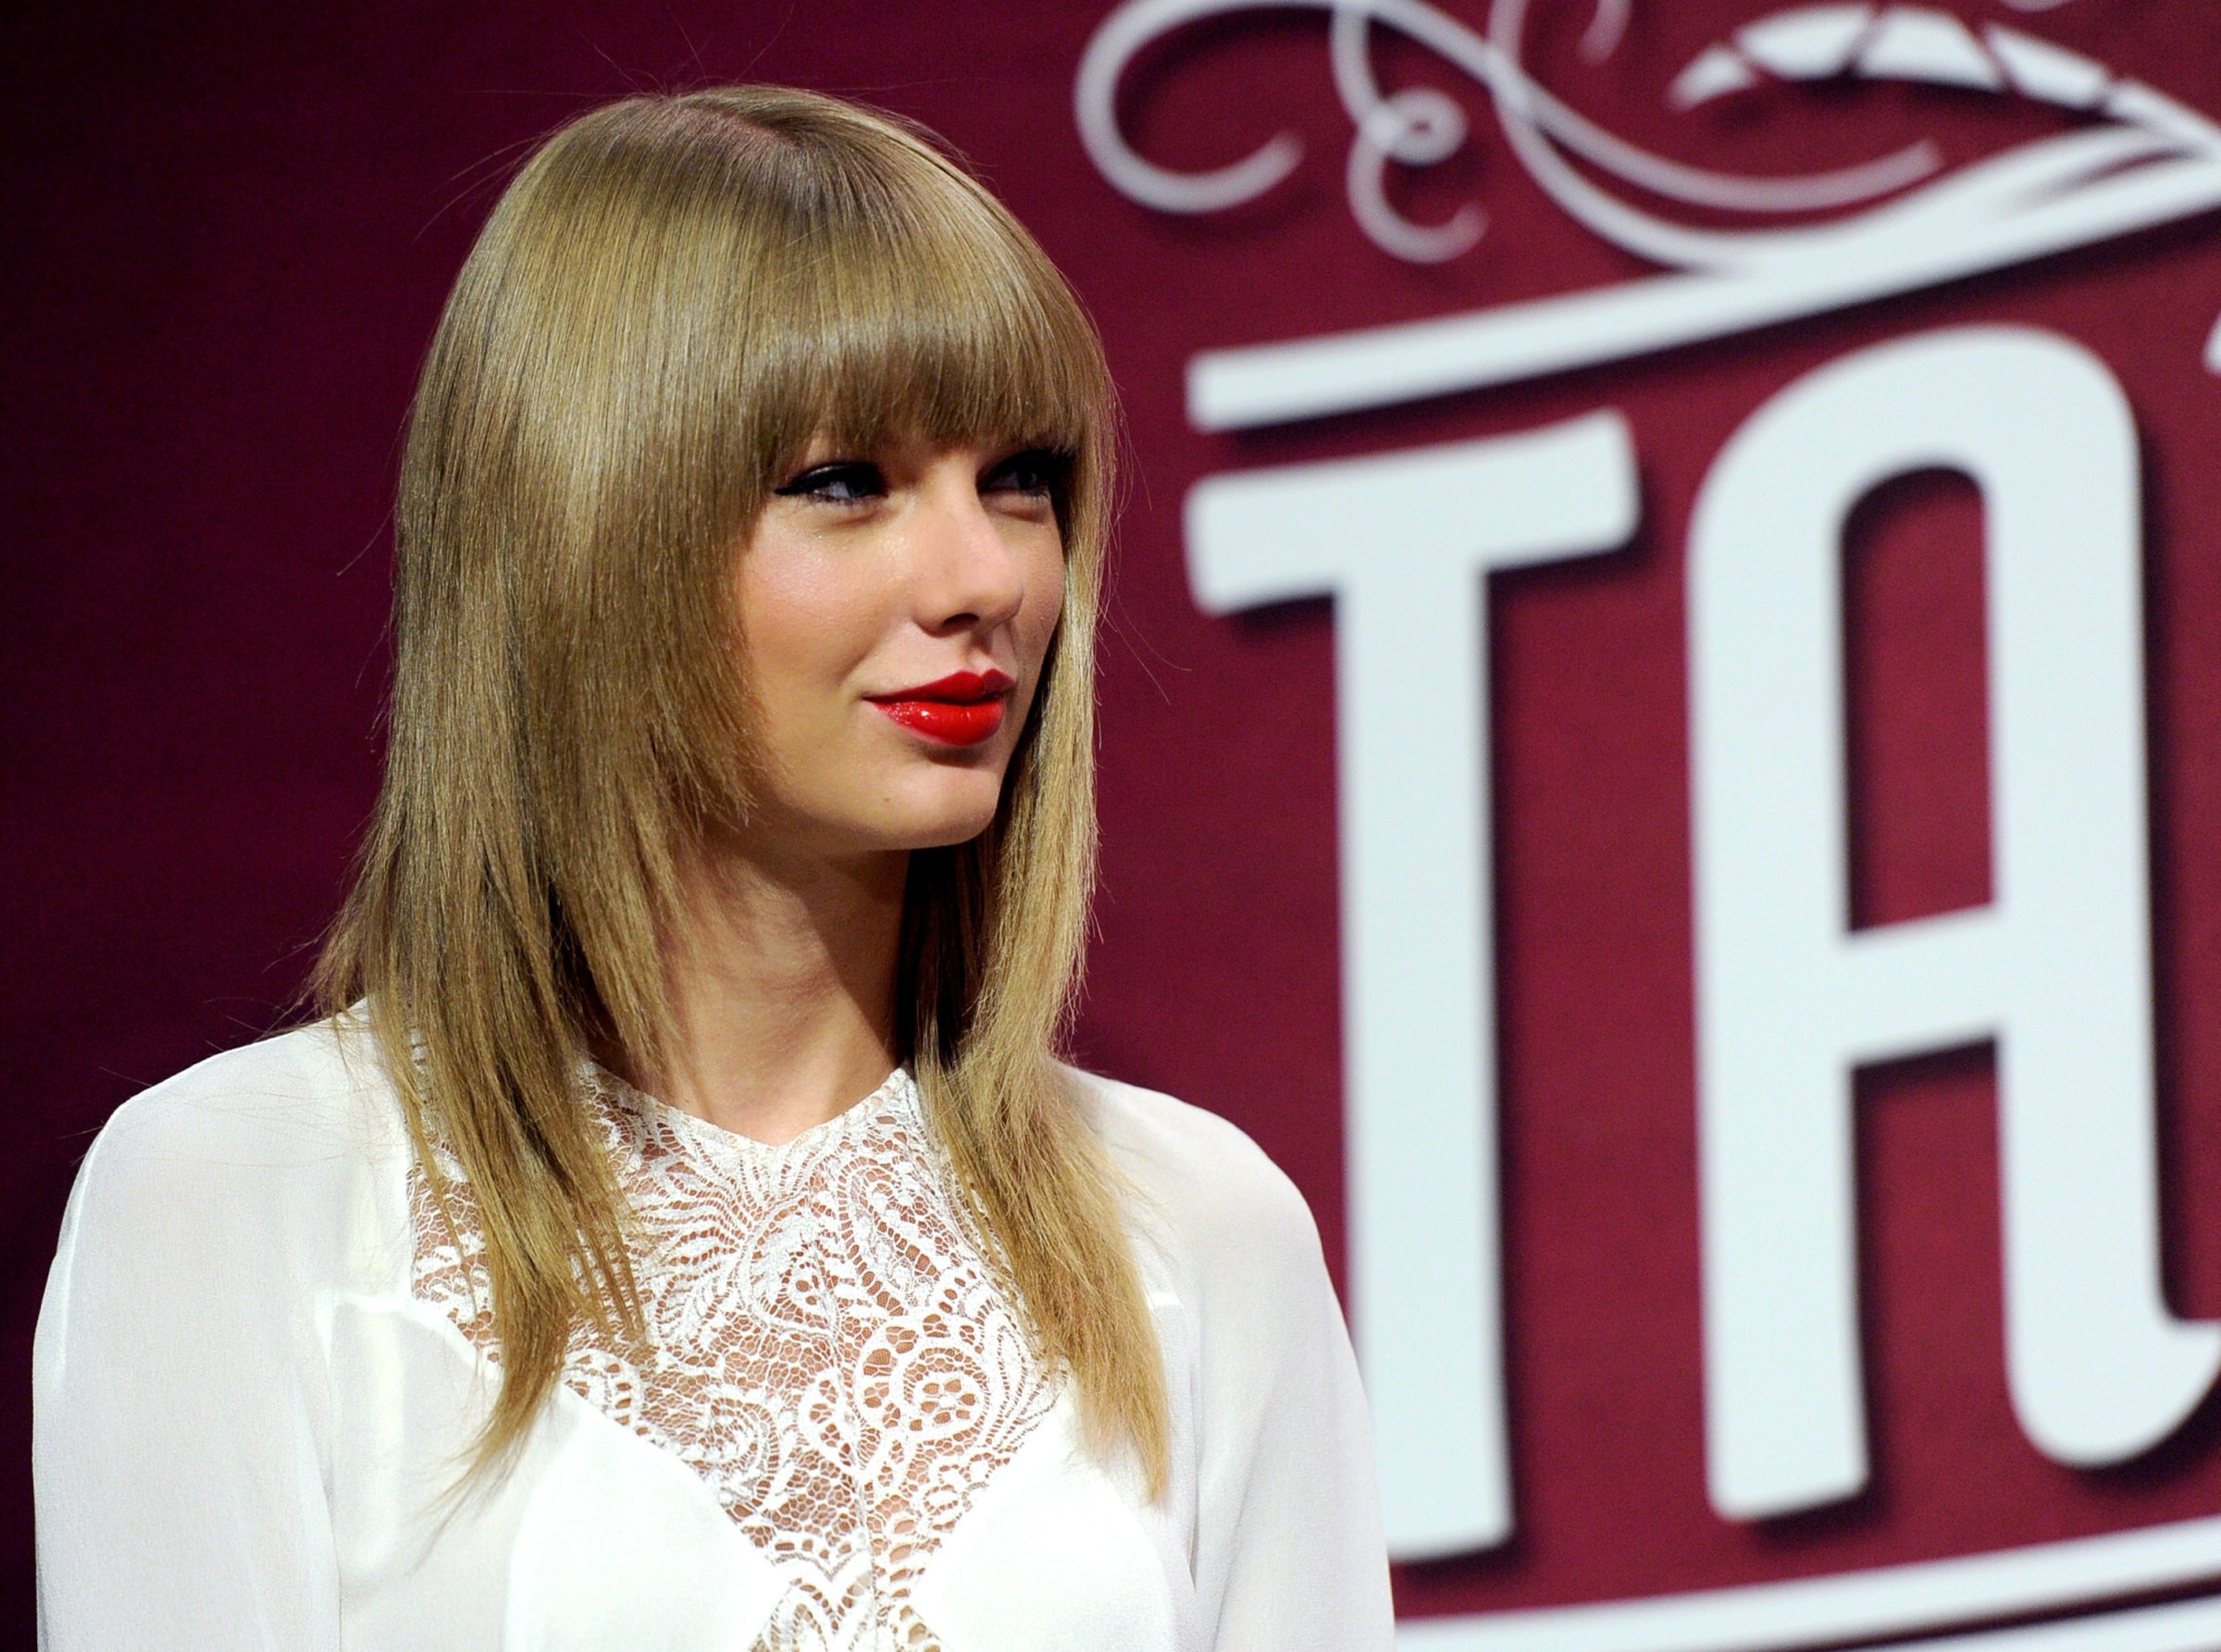 Taylor Swift Press Conference To Announce Breaking The Record Of Solo Artist Sold-Out Shows At The Staples Center